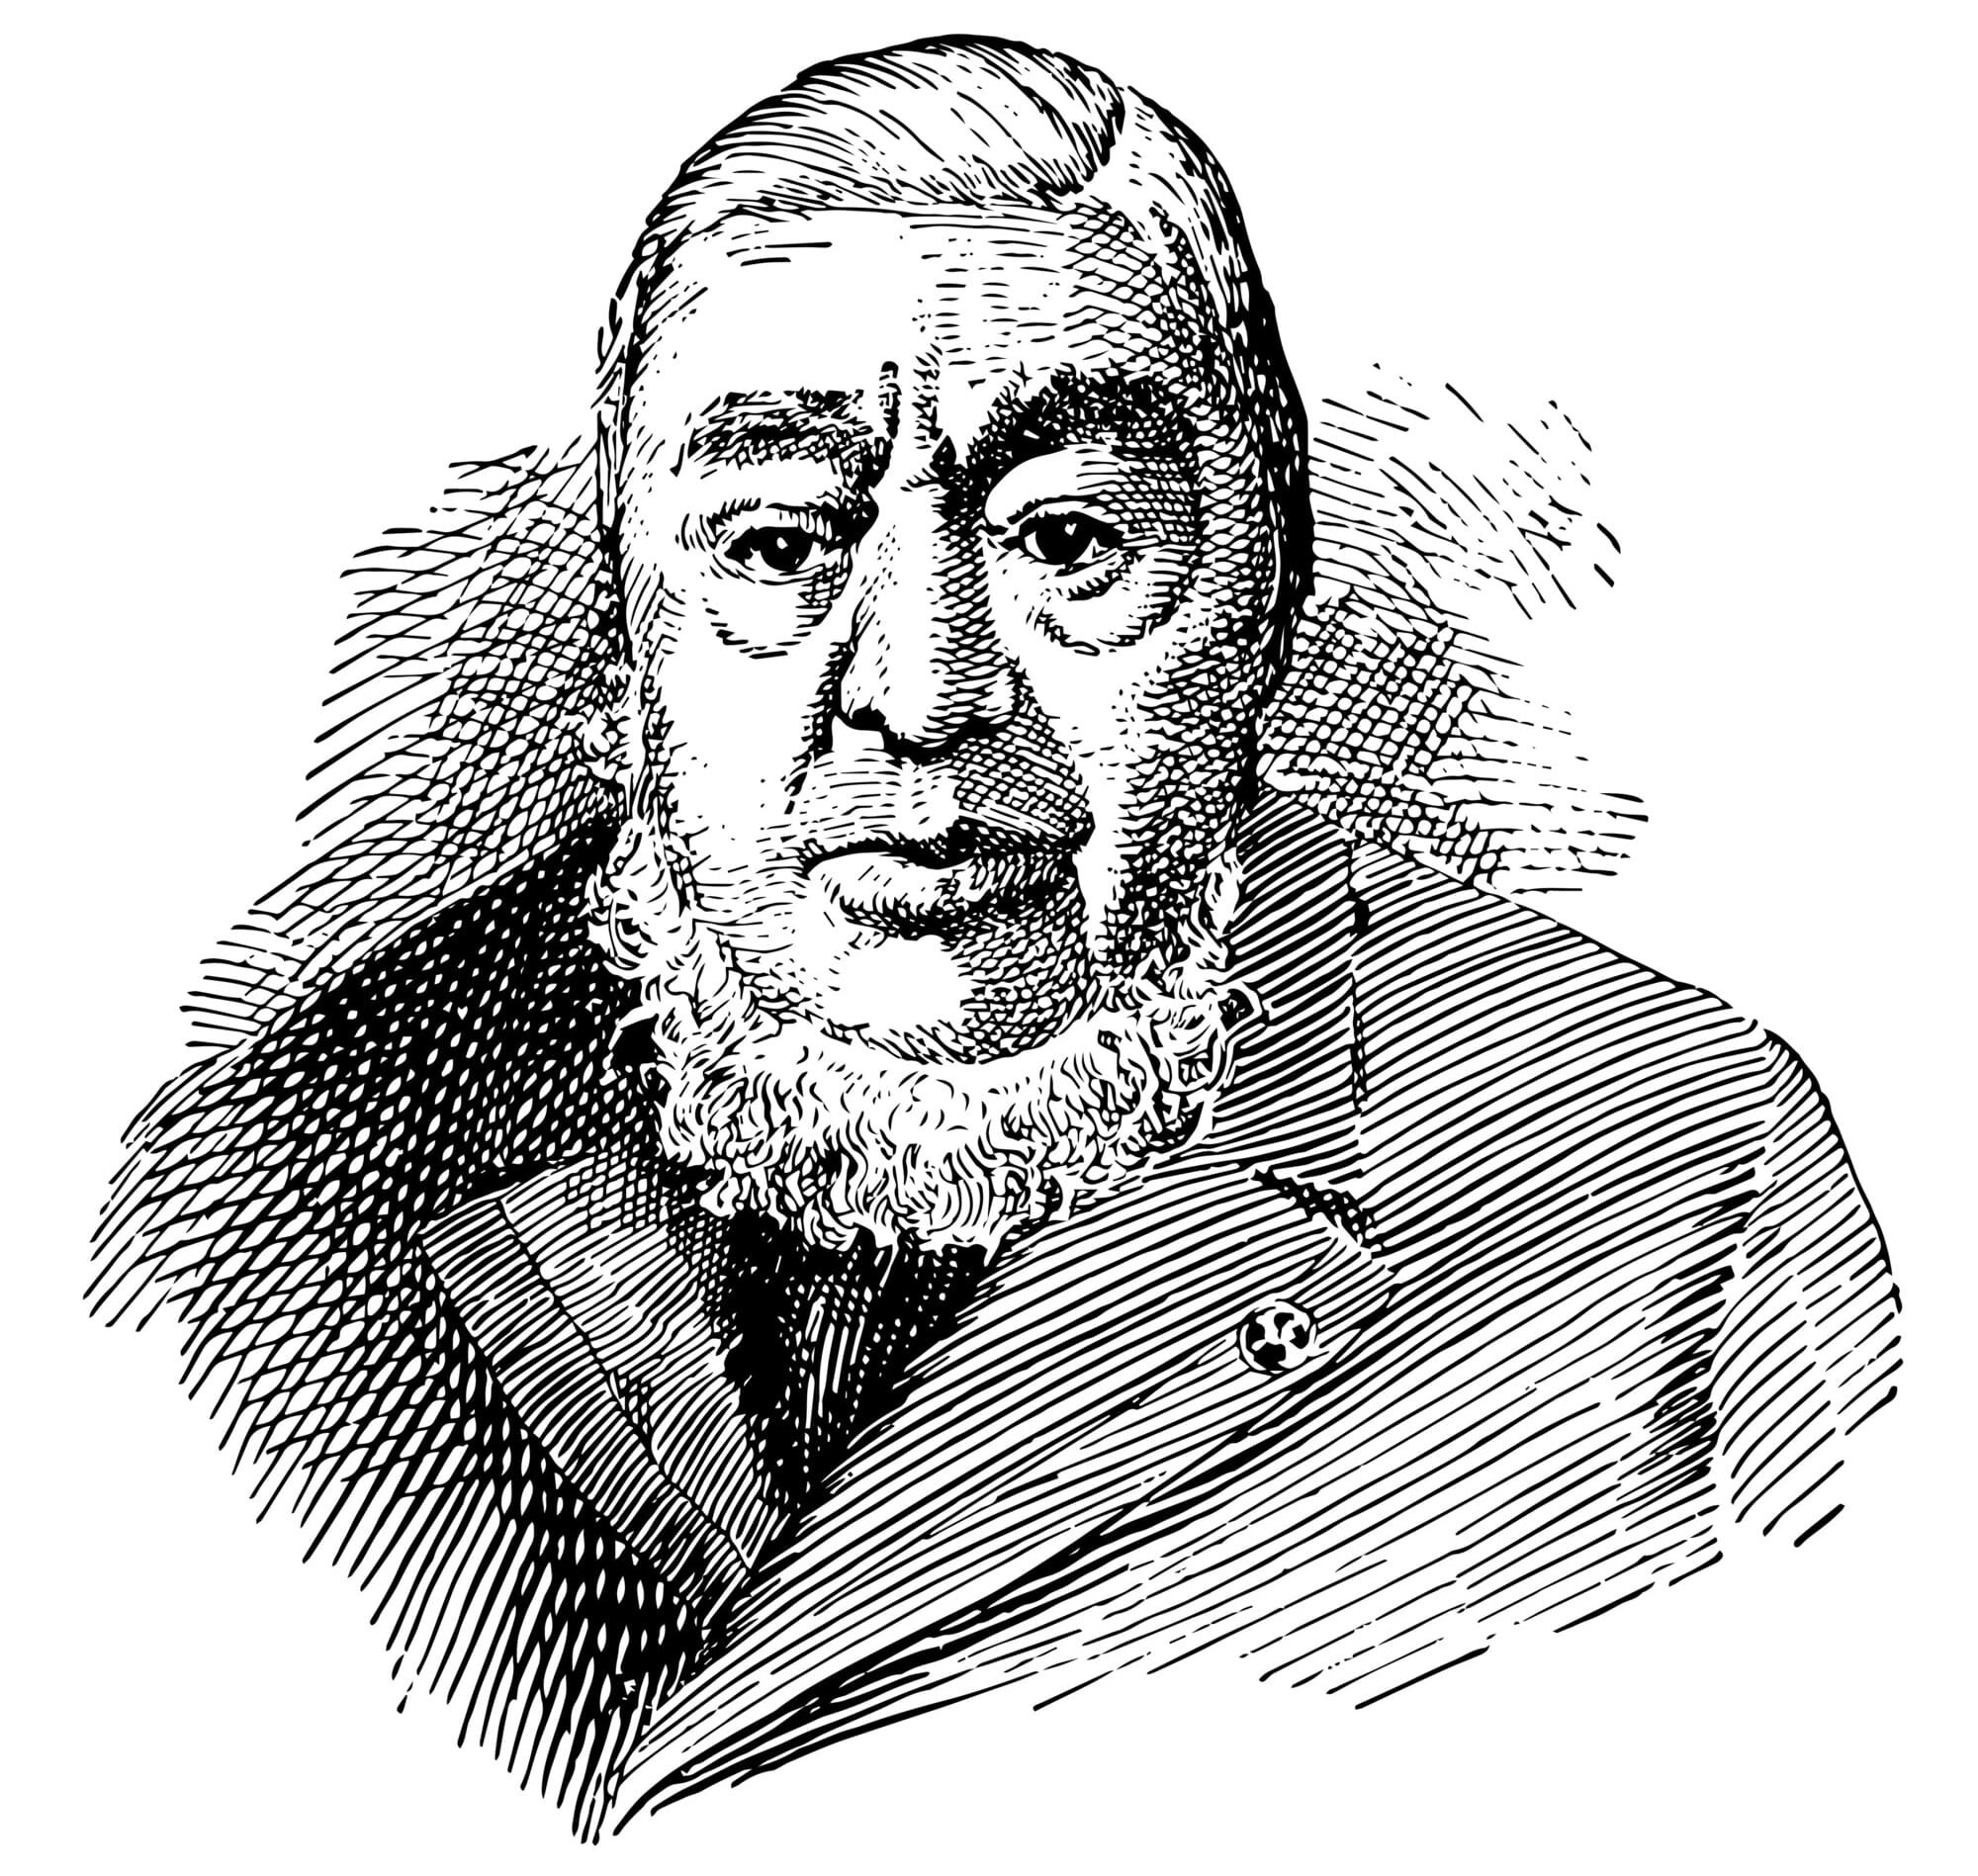 Image from Paul Kruger